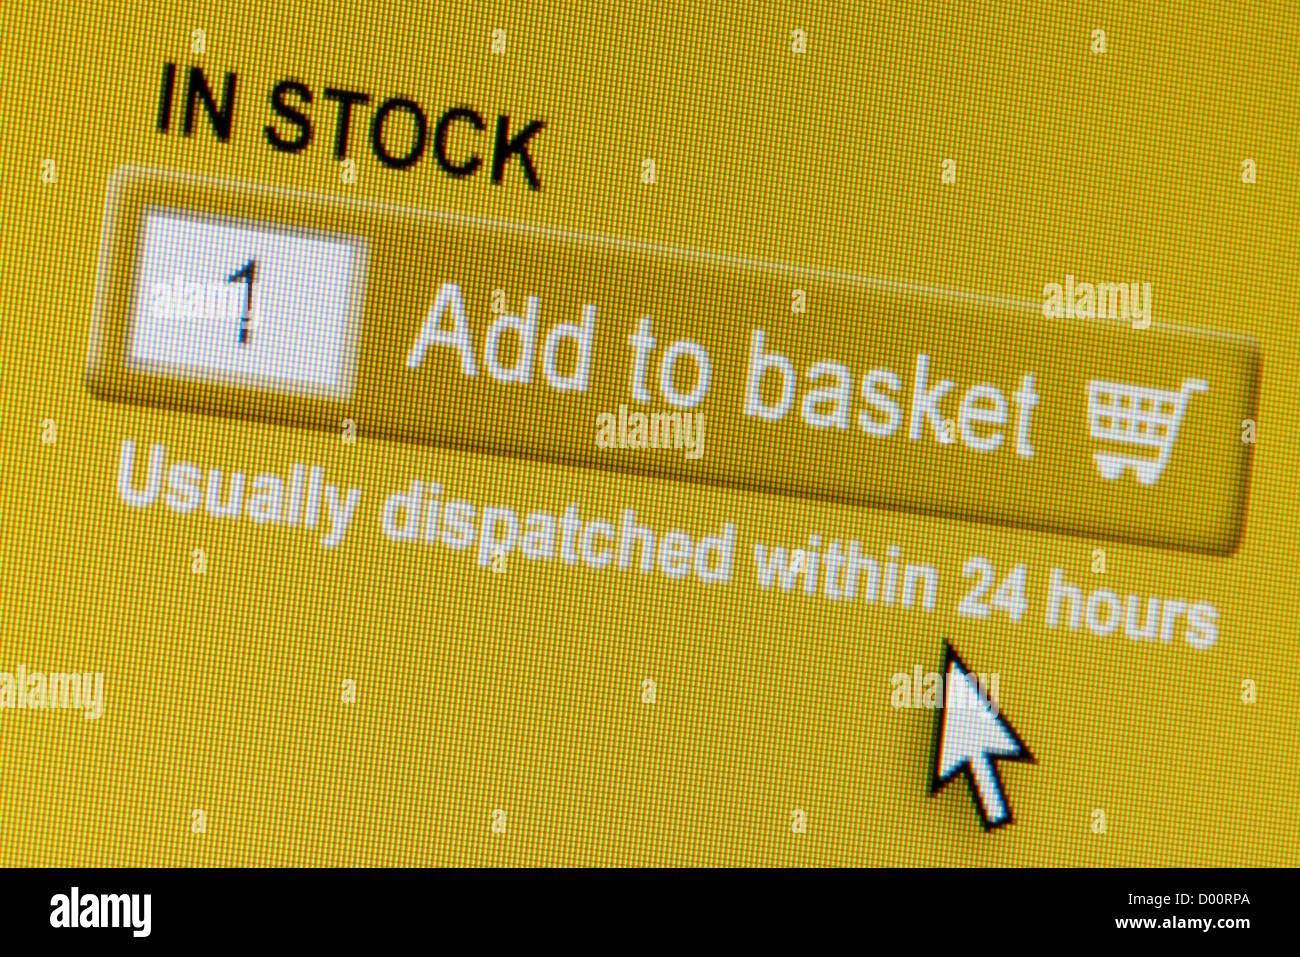 Close up of a fictional website inviting users to add an item to the shopping basket cart. Stock Photo